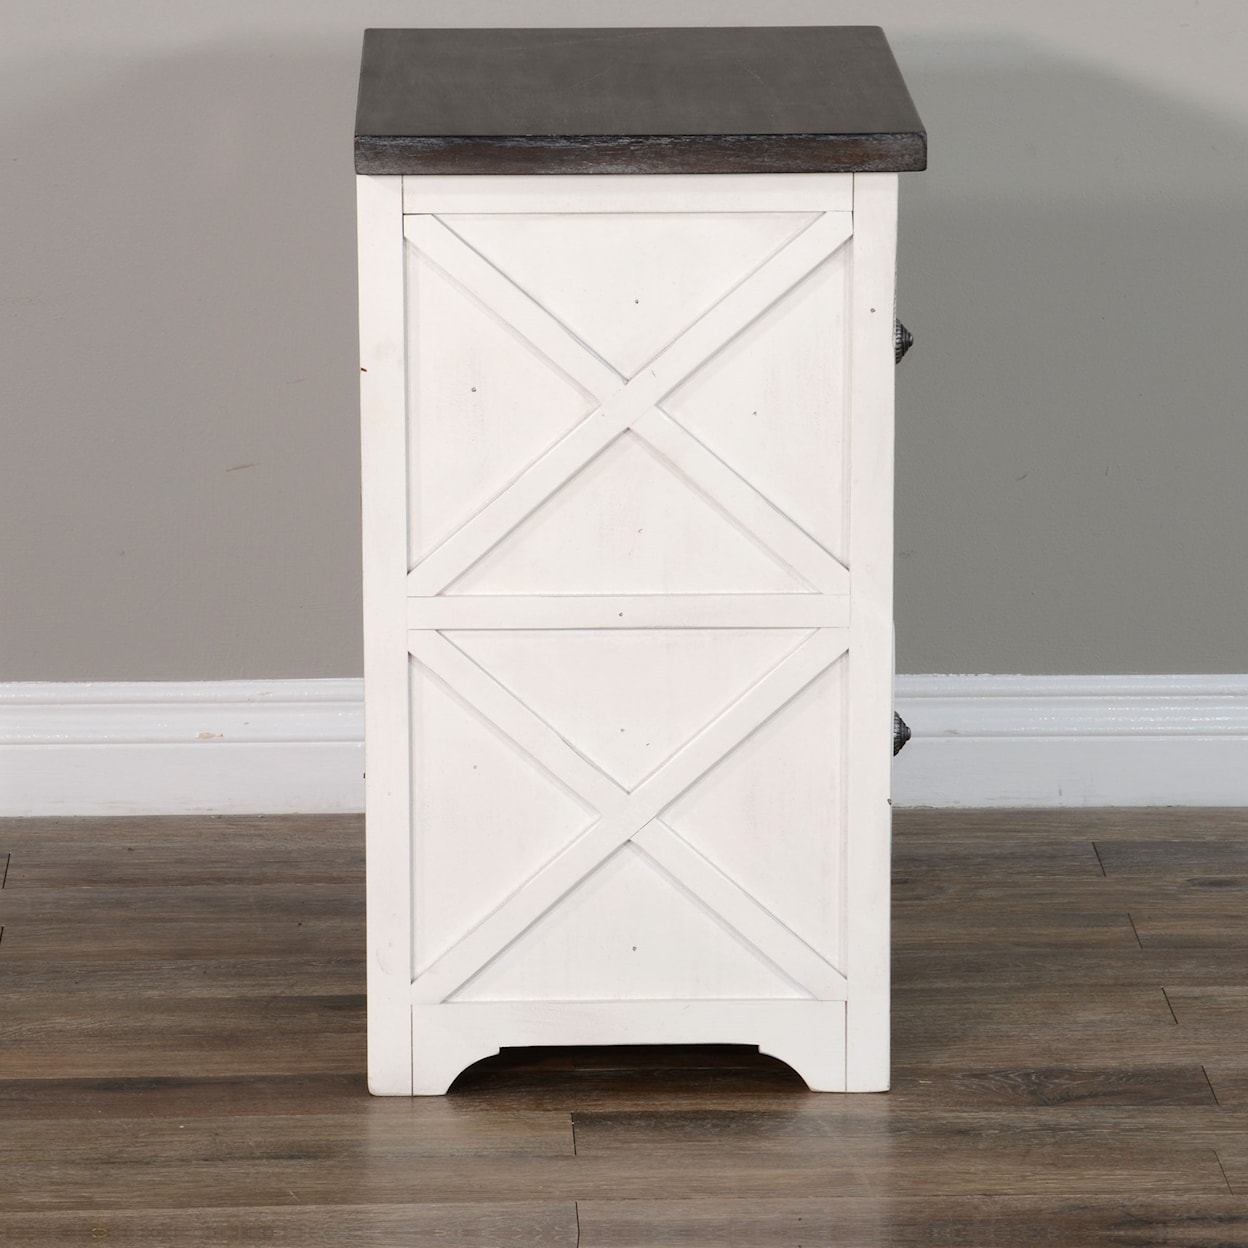 Sunny Designs Carriage House File Cabinet